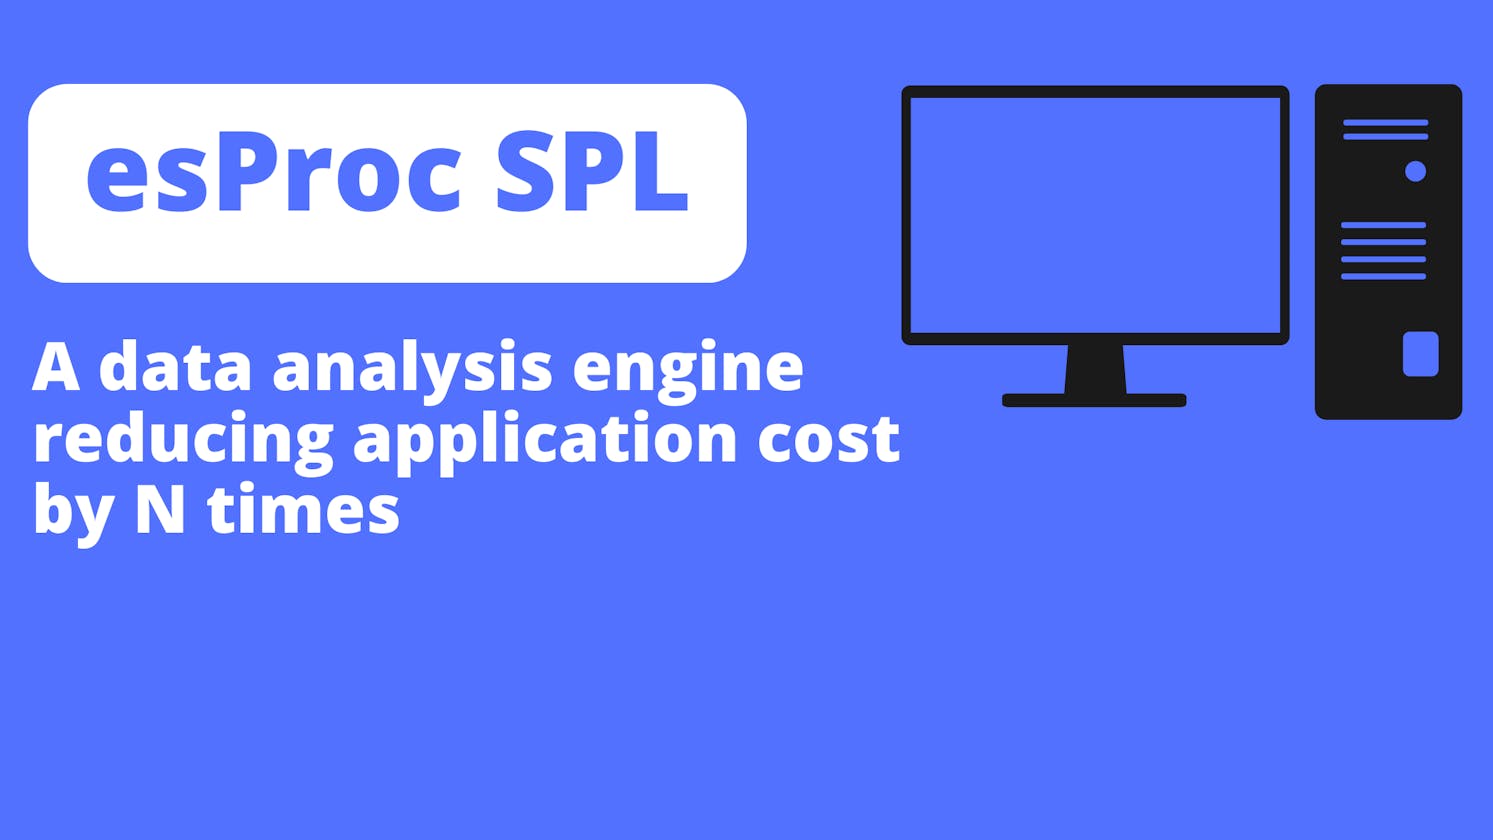 esProc SPL, a data analysis engine reducing application cost by N times